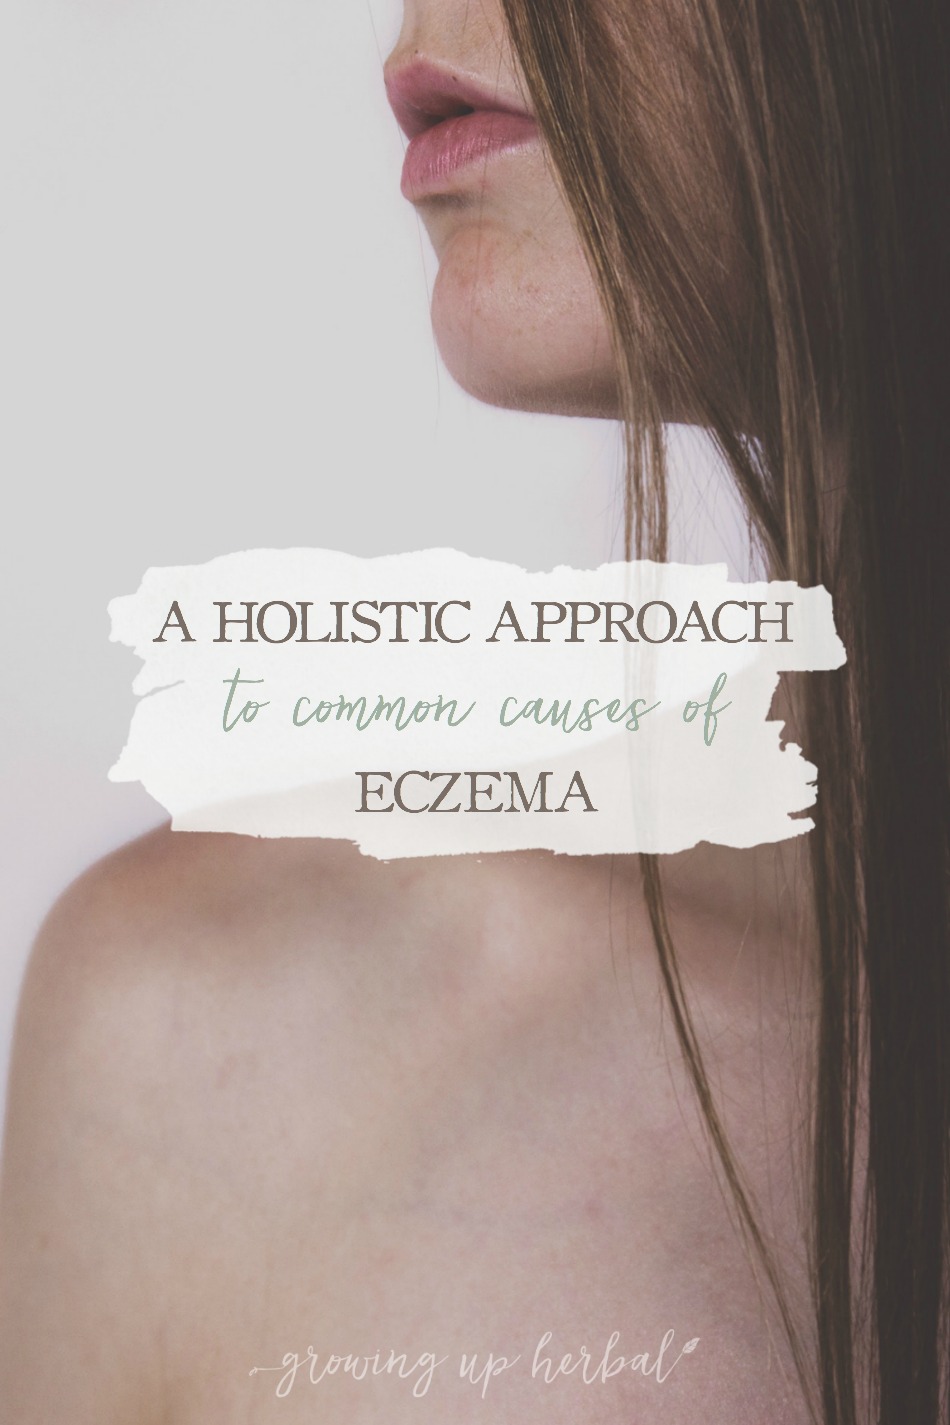 A Holistic Approach To Common Causes of Eczema | Growing Up Herbal | Do you or someone you know suffer from eczema? Learn today how to take a holistic approach to eczema and find the healing you need!